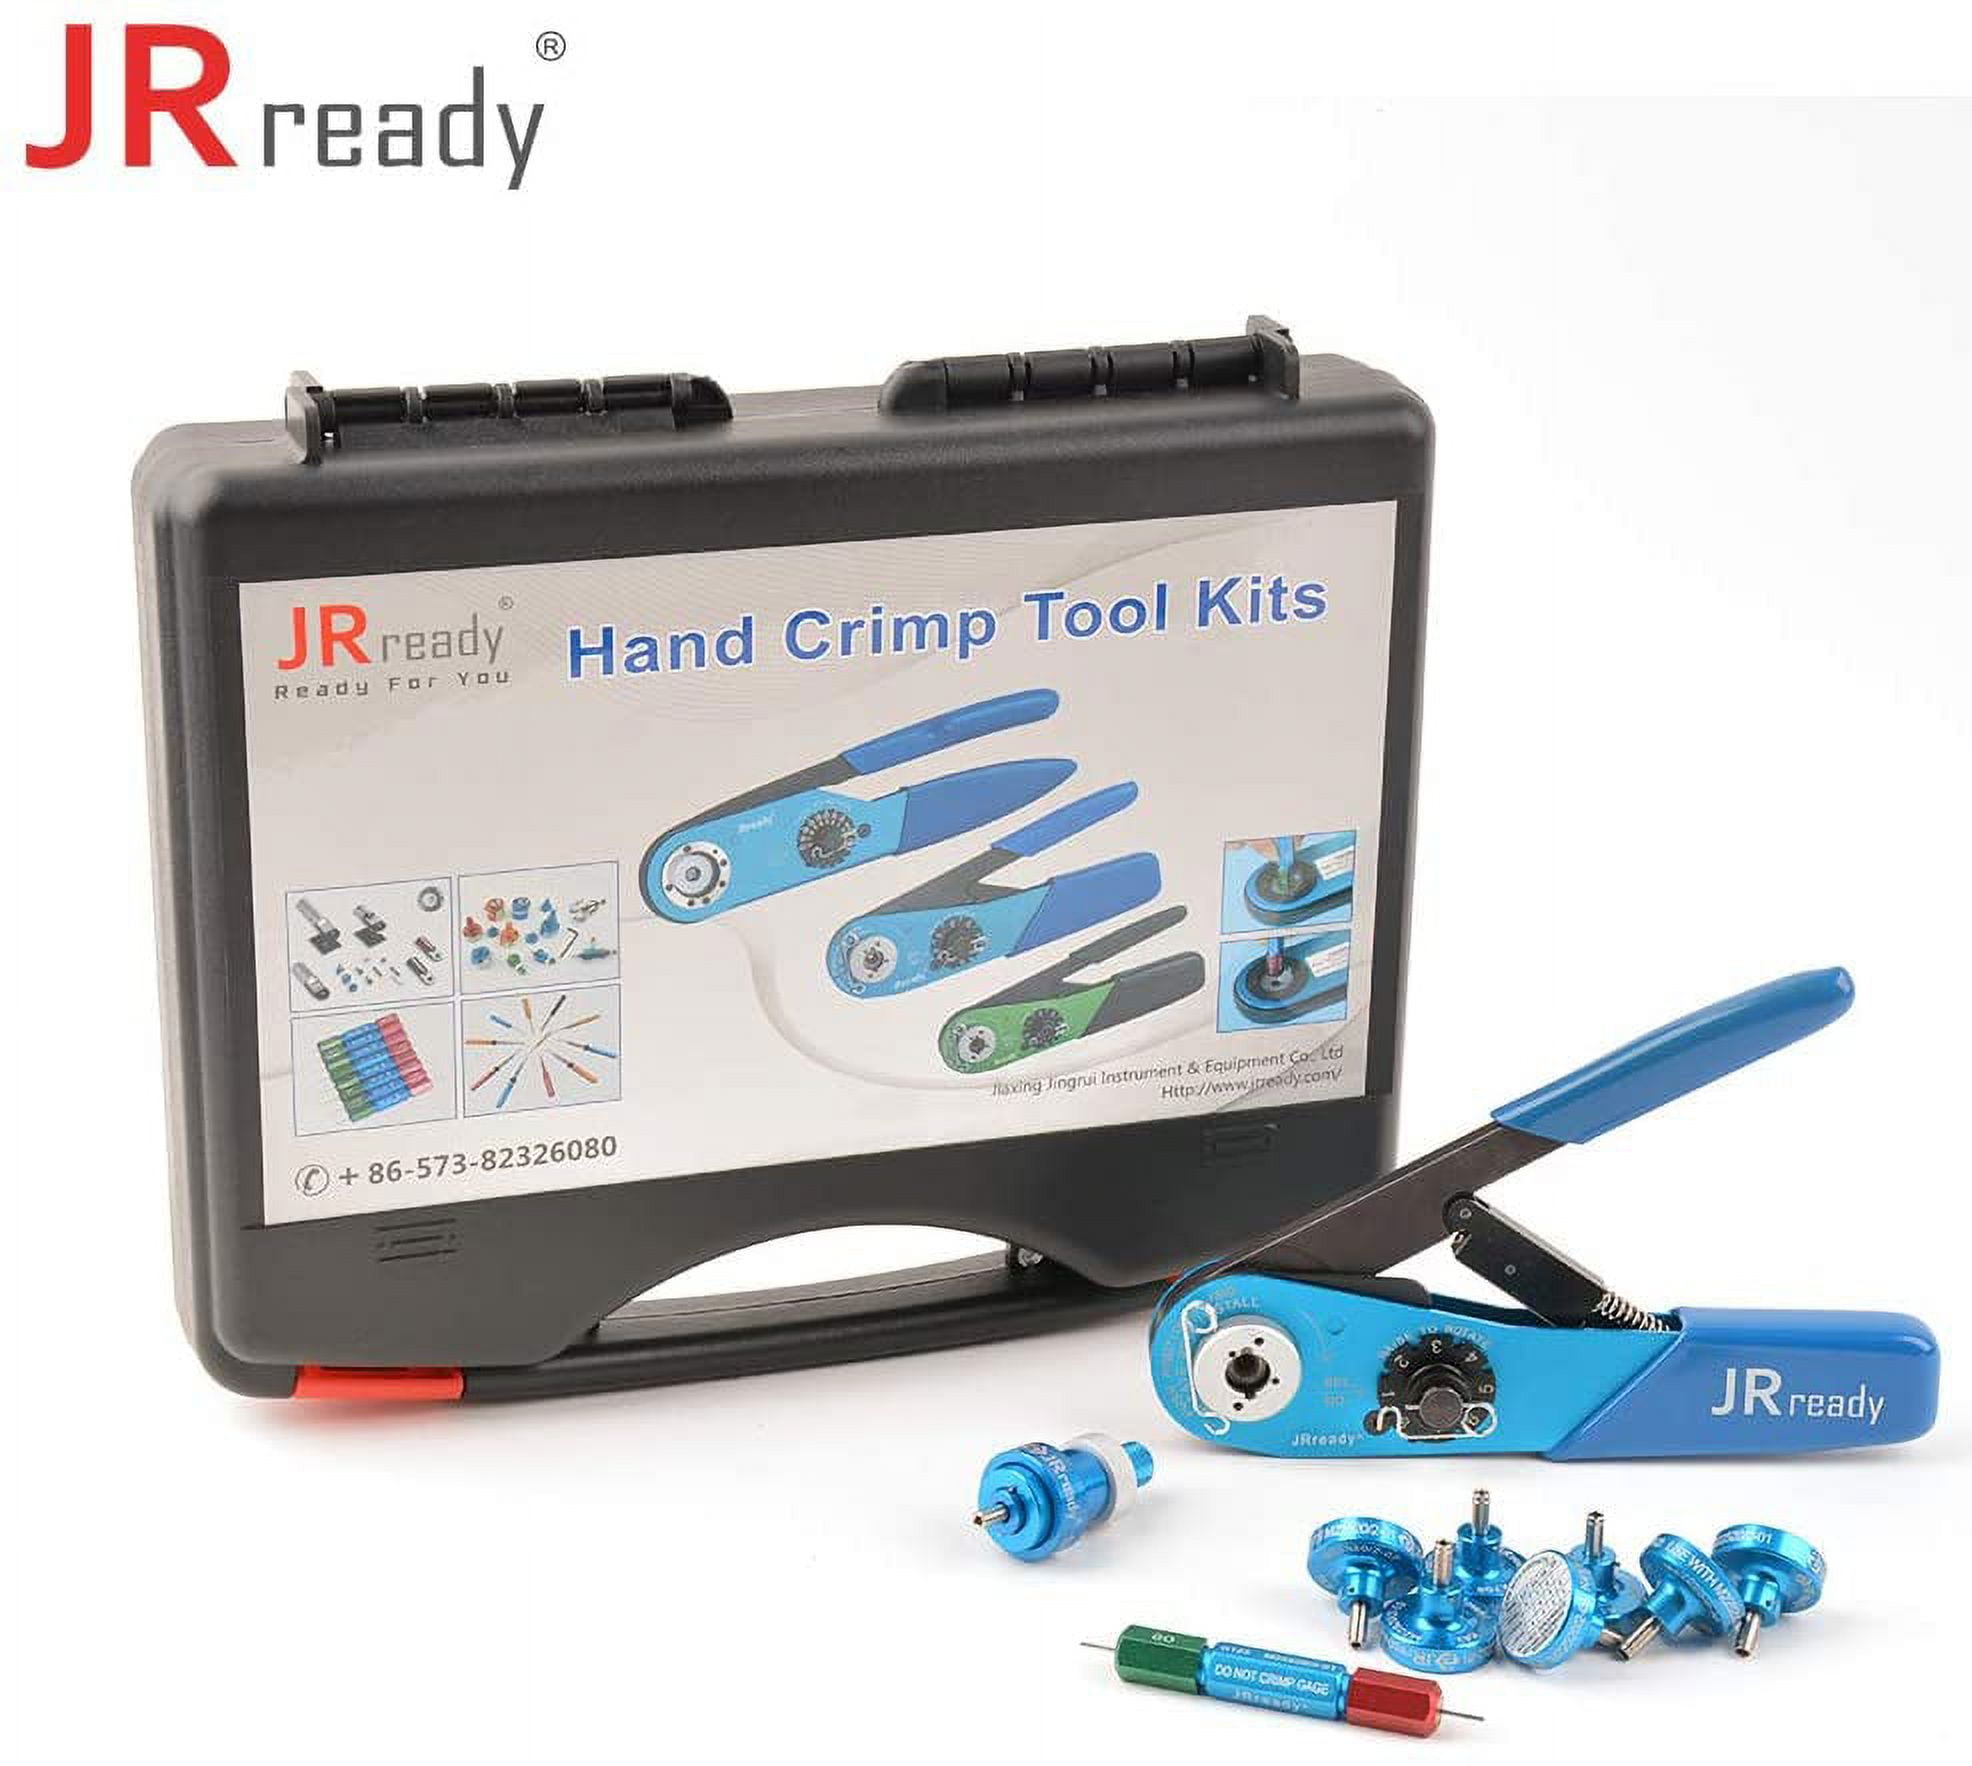 Gauge in Positioner Barrel and Miniature 01 32awg for 2 M22520 Contact Indent Solid Crimp and Tool 615717 Crimper YJQ G125 20 Electronic W1A Systems 7 JRready Kit ST2060 Connector of Aviation